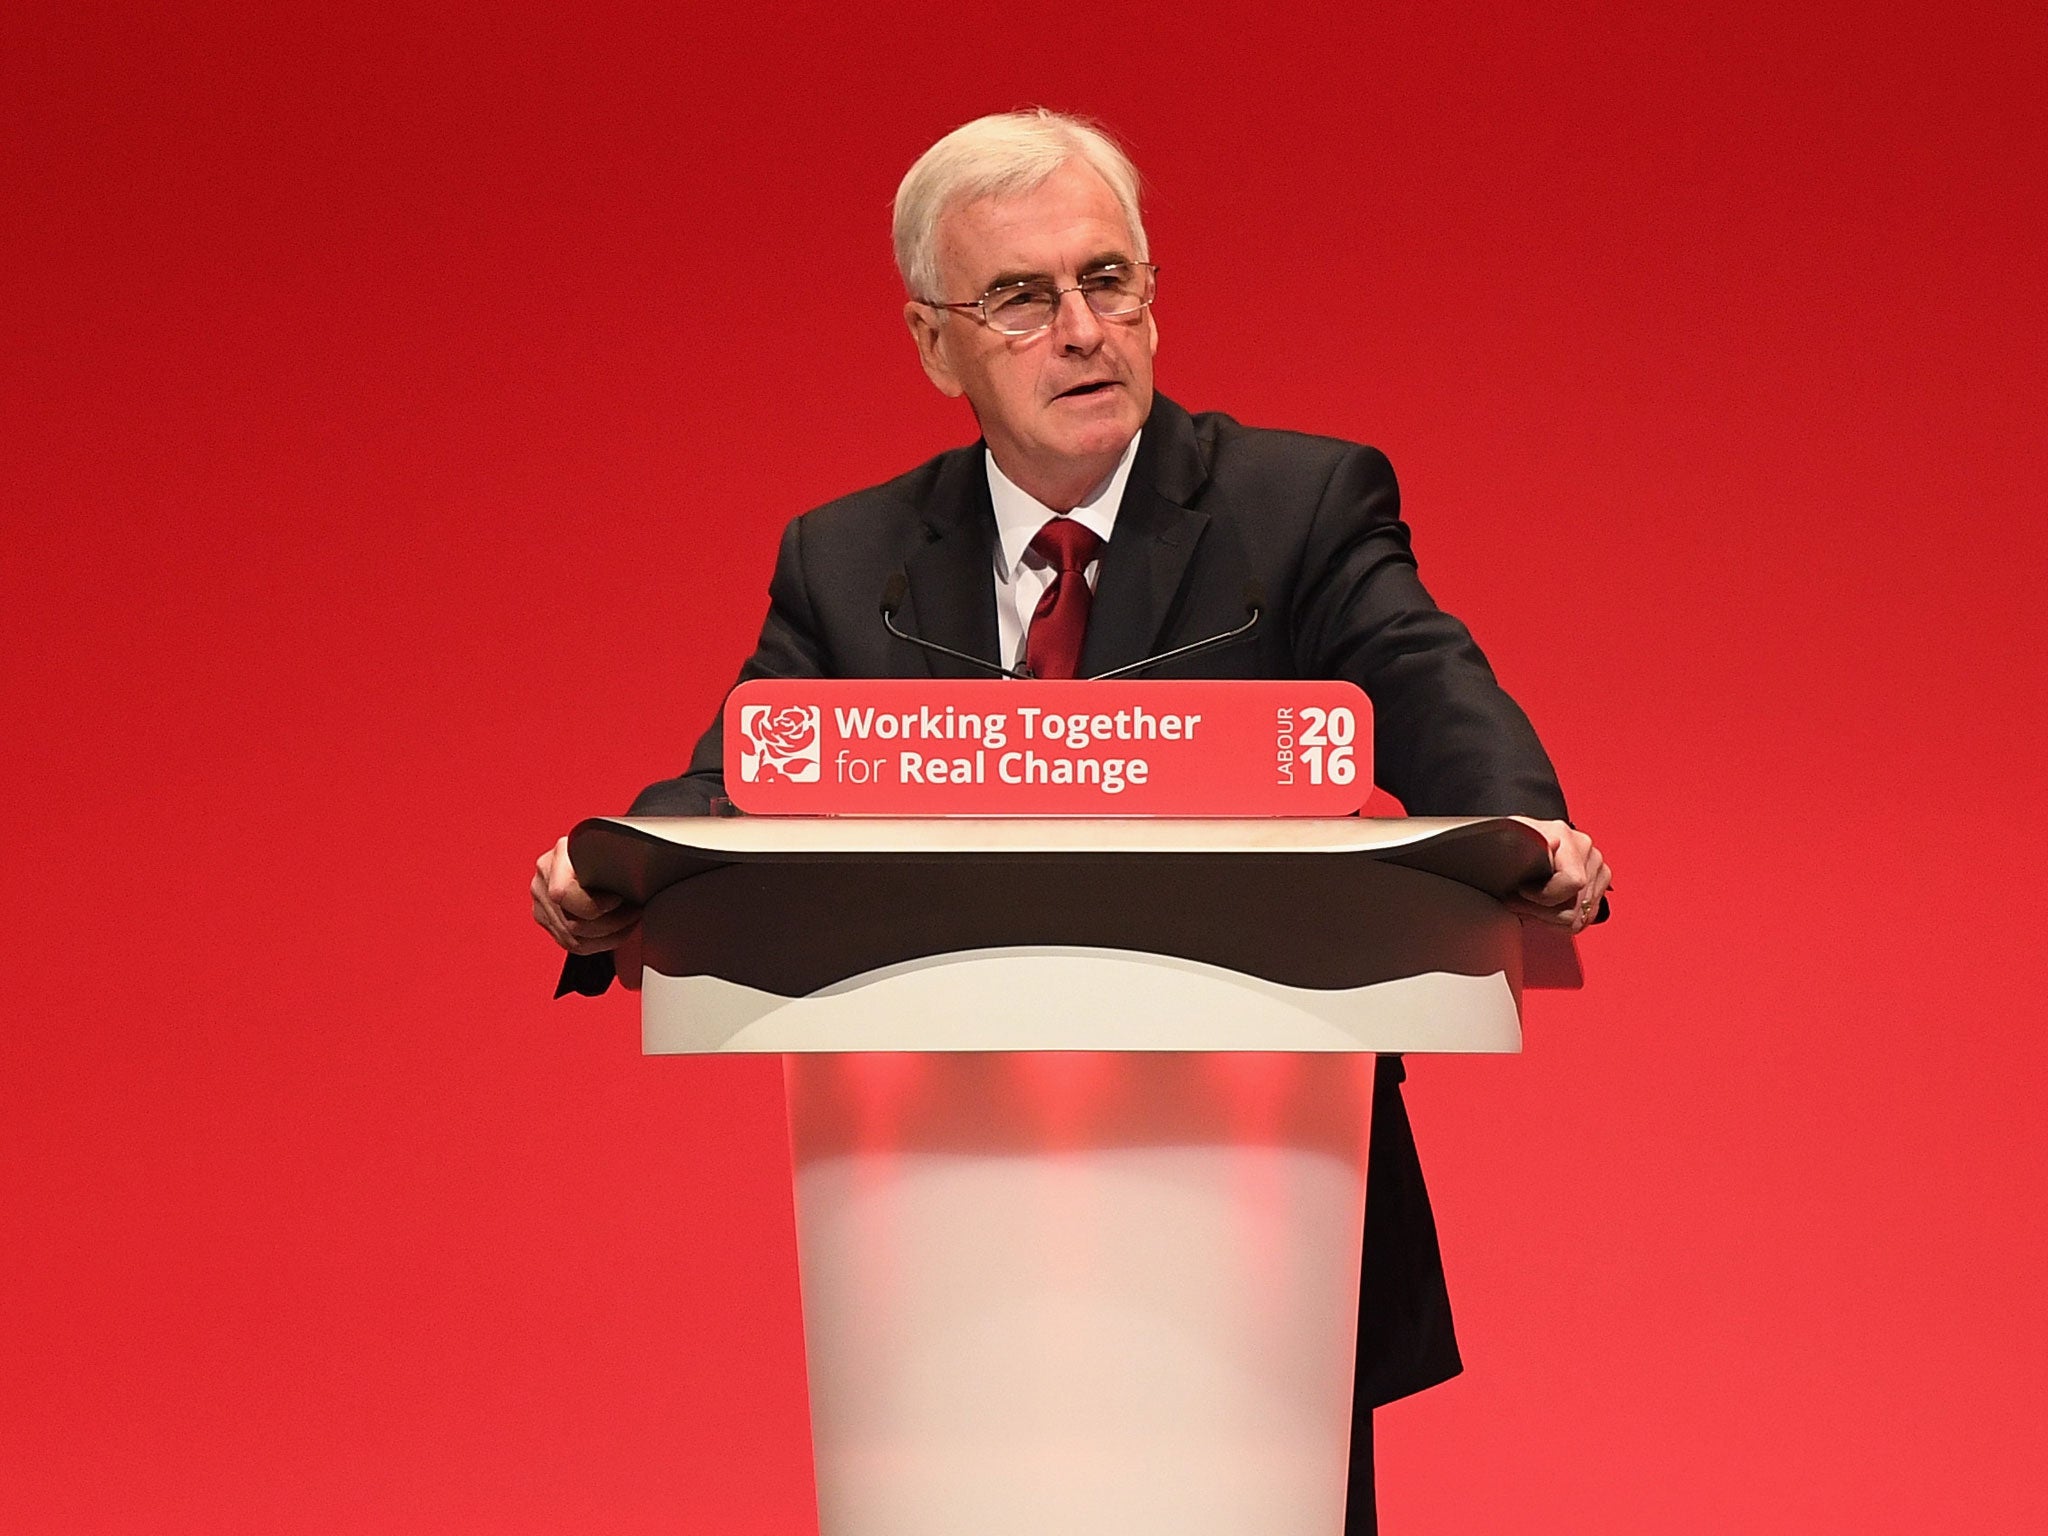 During his speech Mr McDonnell confirmed his ambition to shake up the tax system